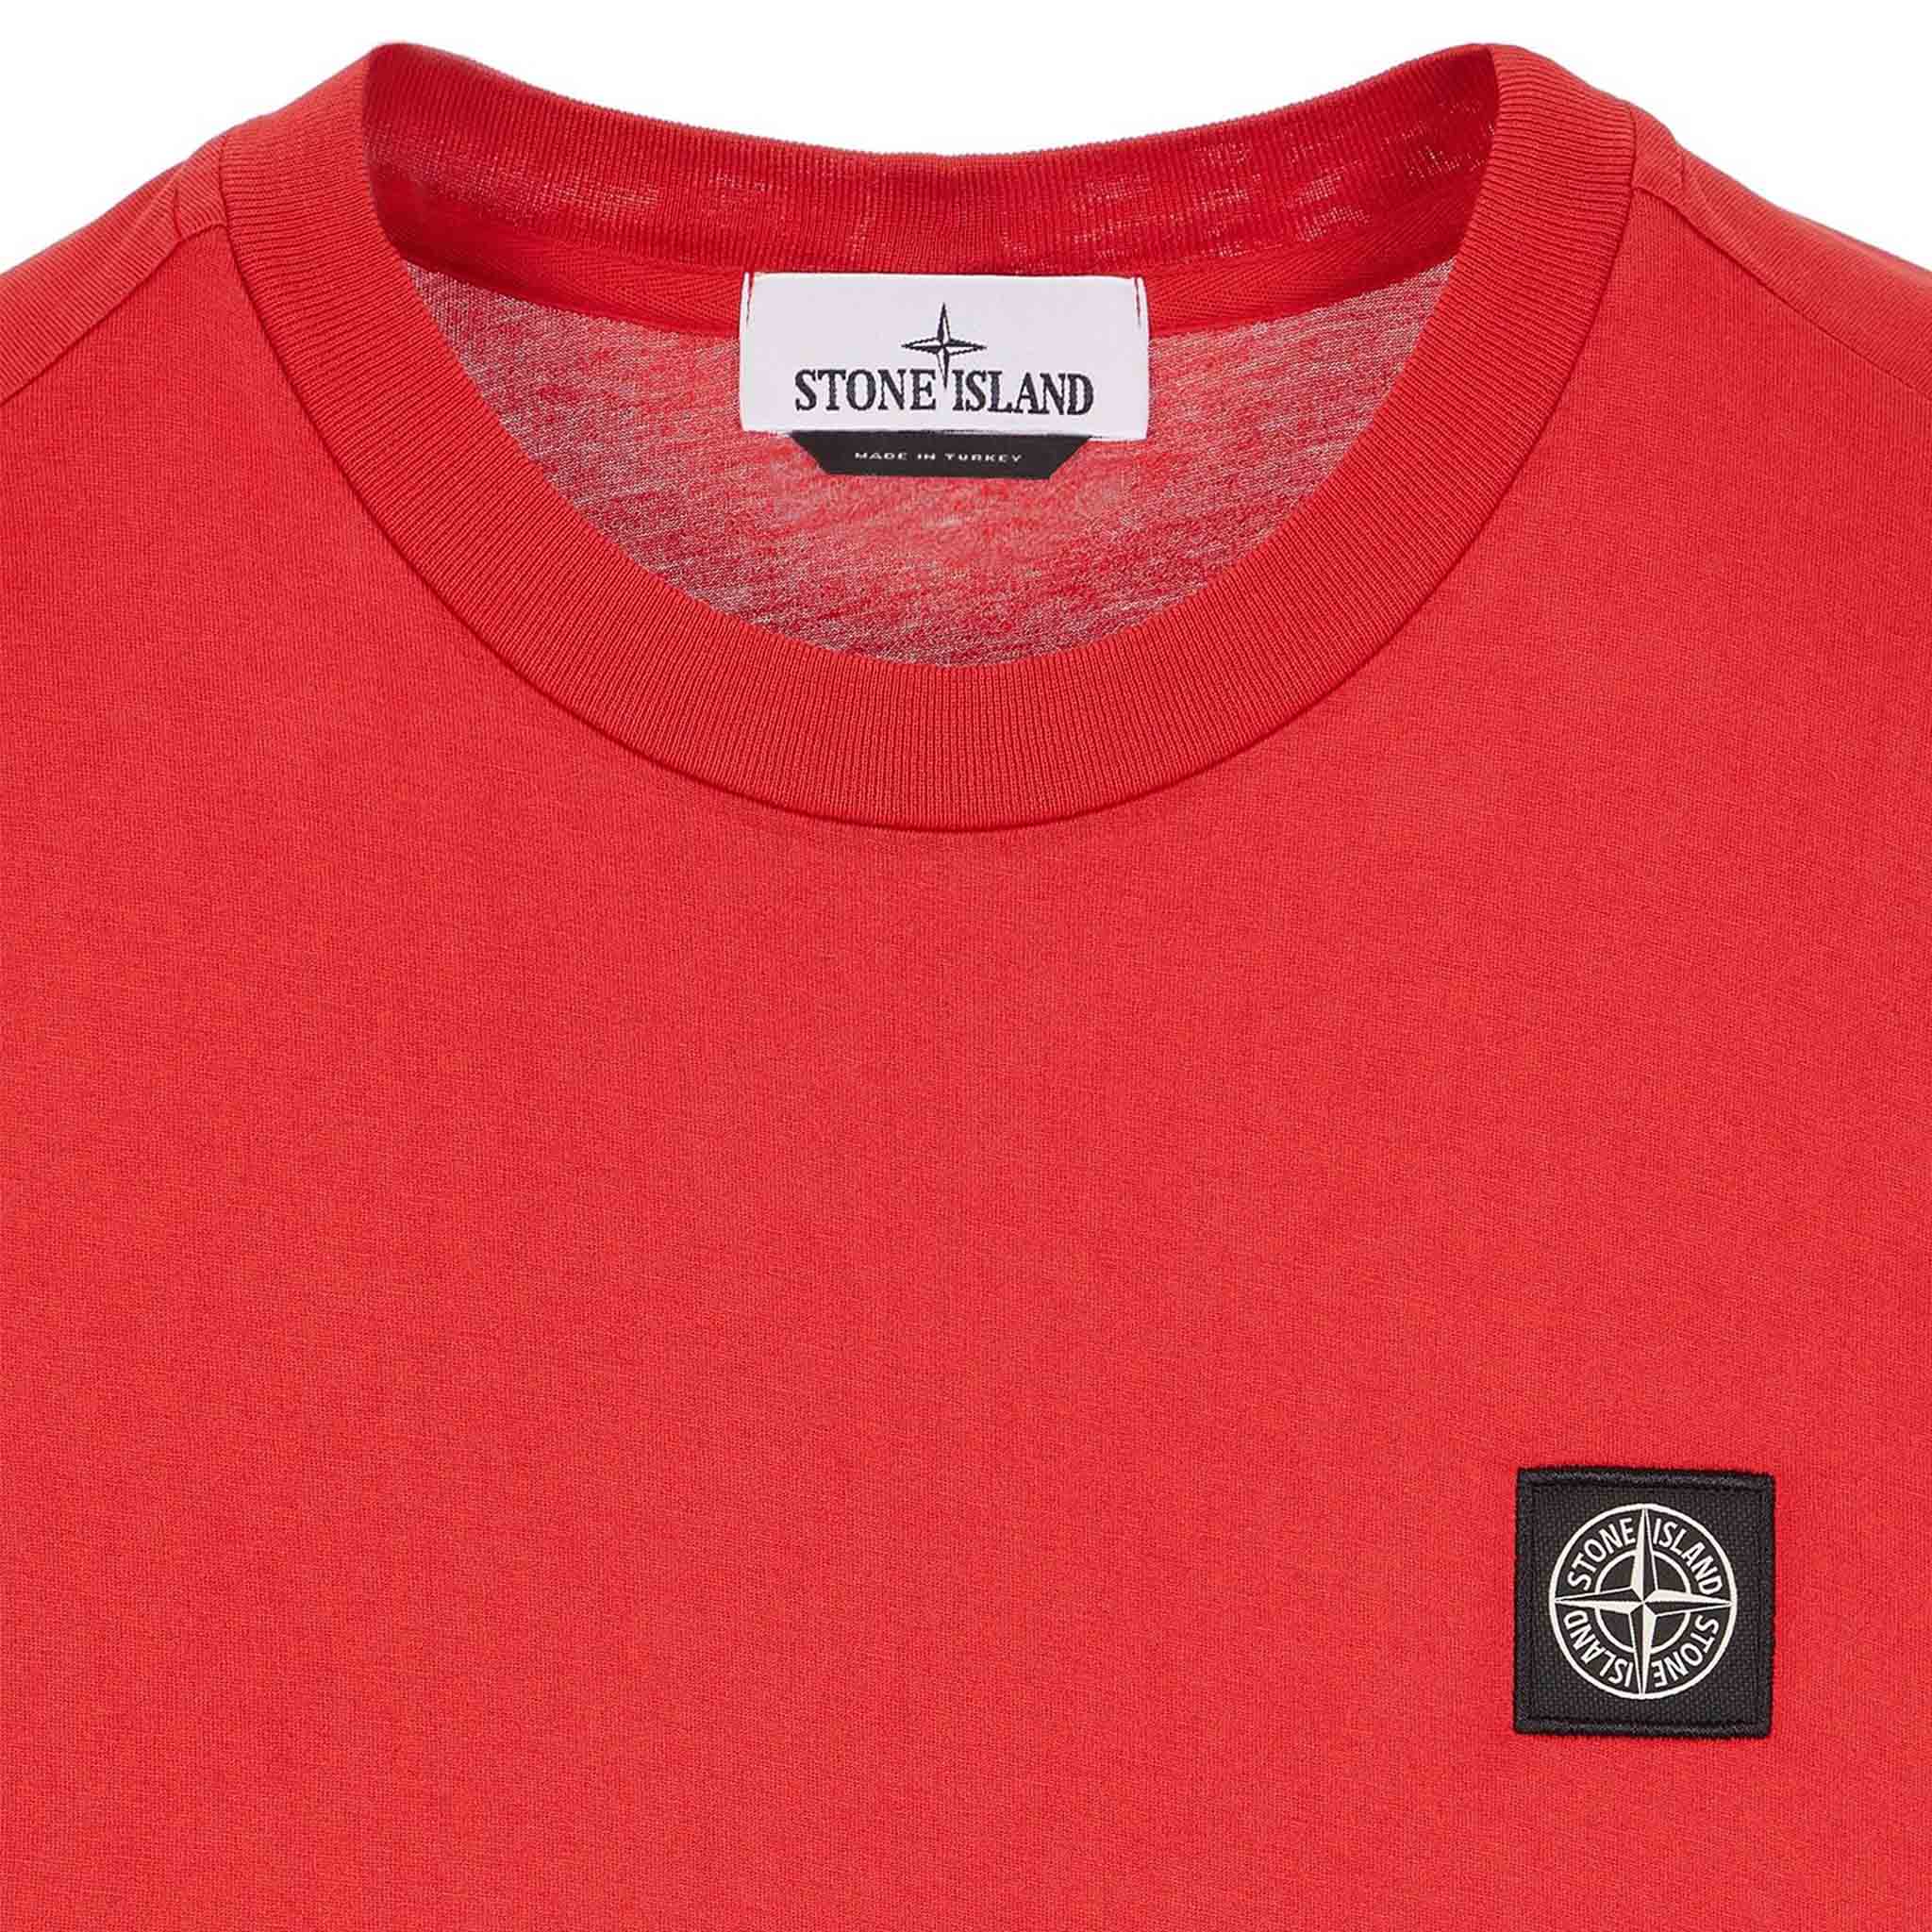 Stone Island Compass Logo T-Shirt in Red